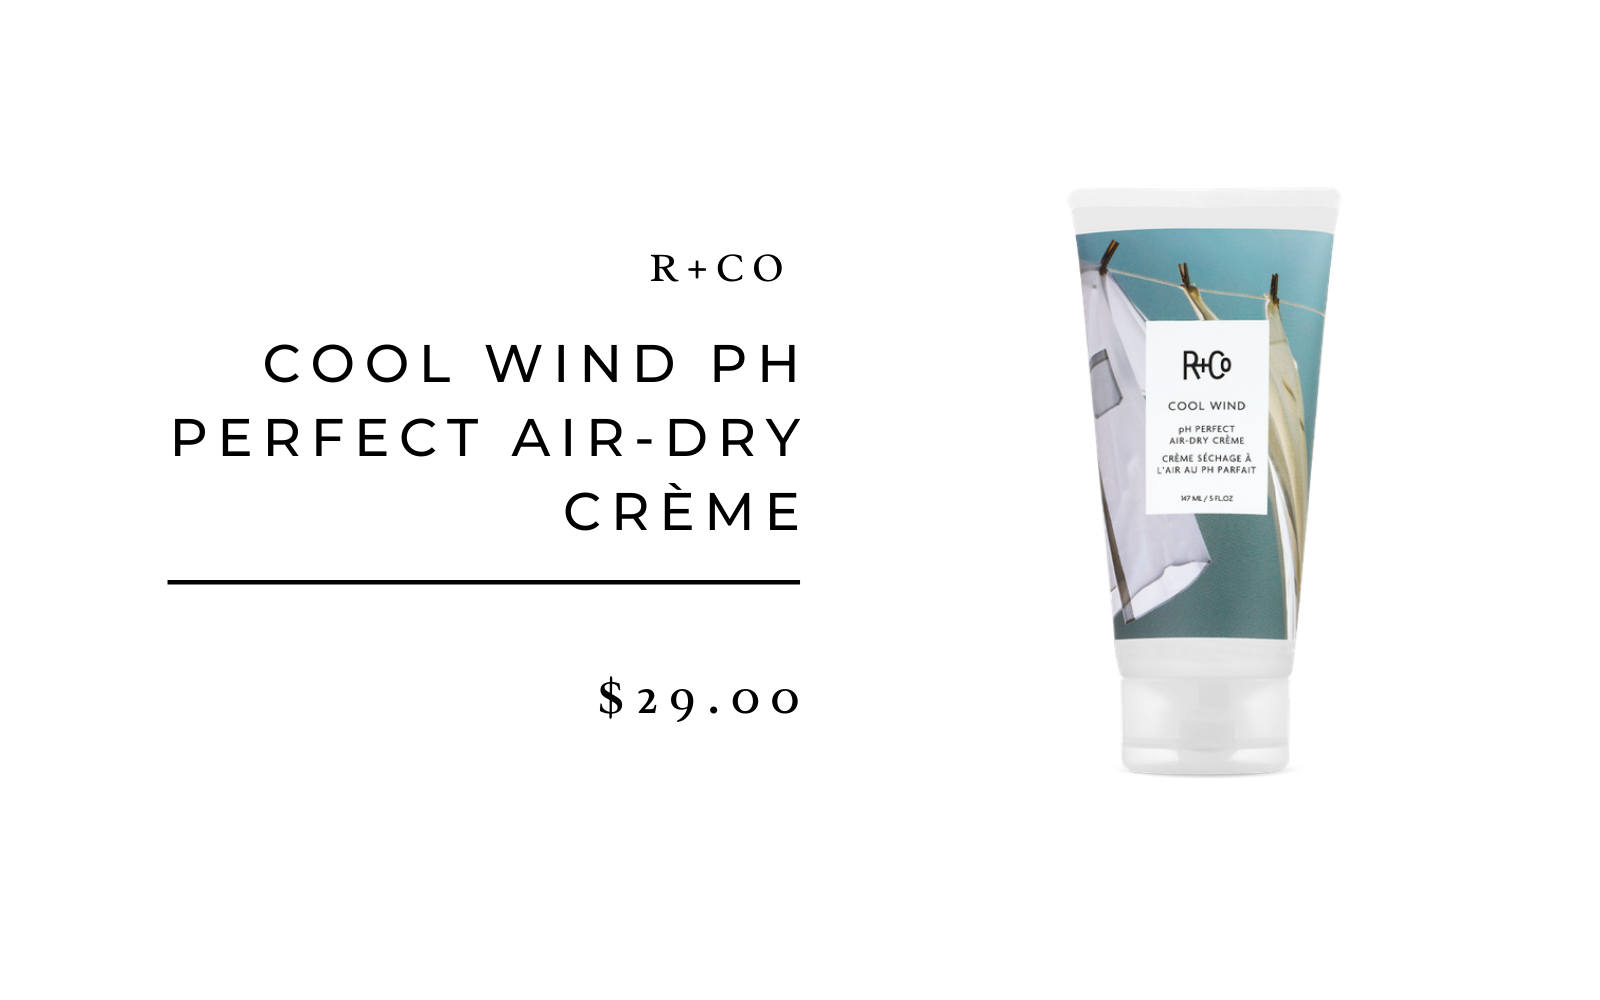 R+Co Cool Wind PH Perfect Air-Dry Creme